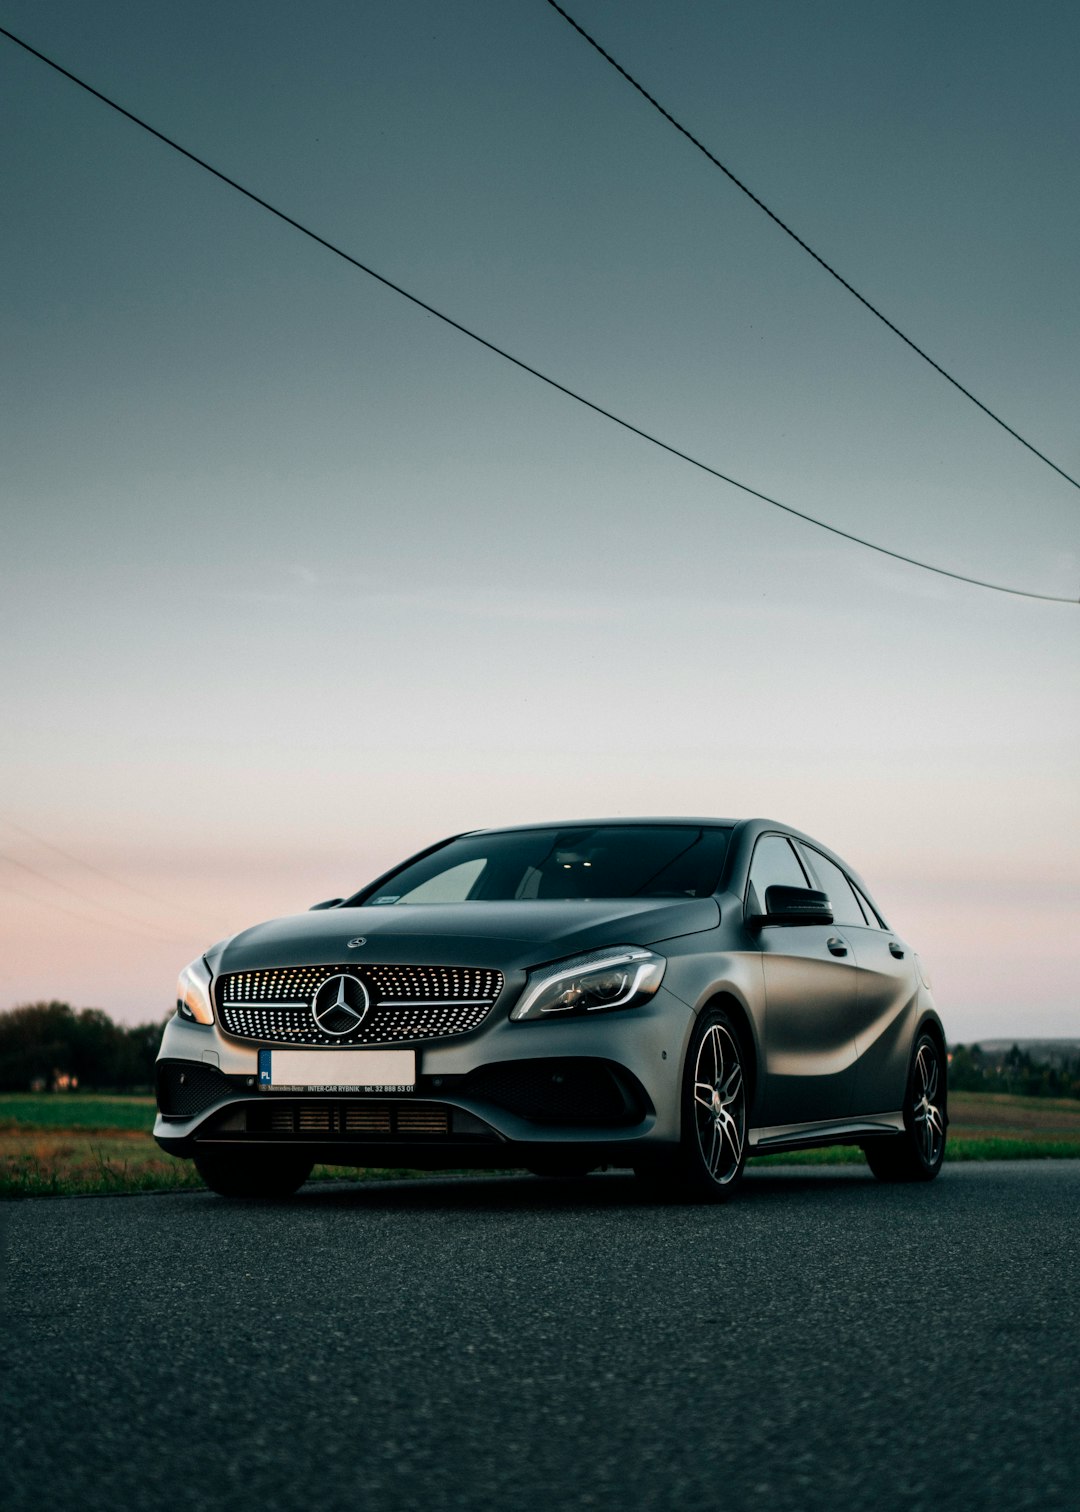 silver mercedes benz coupe on green grass field during daytime